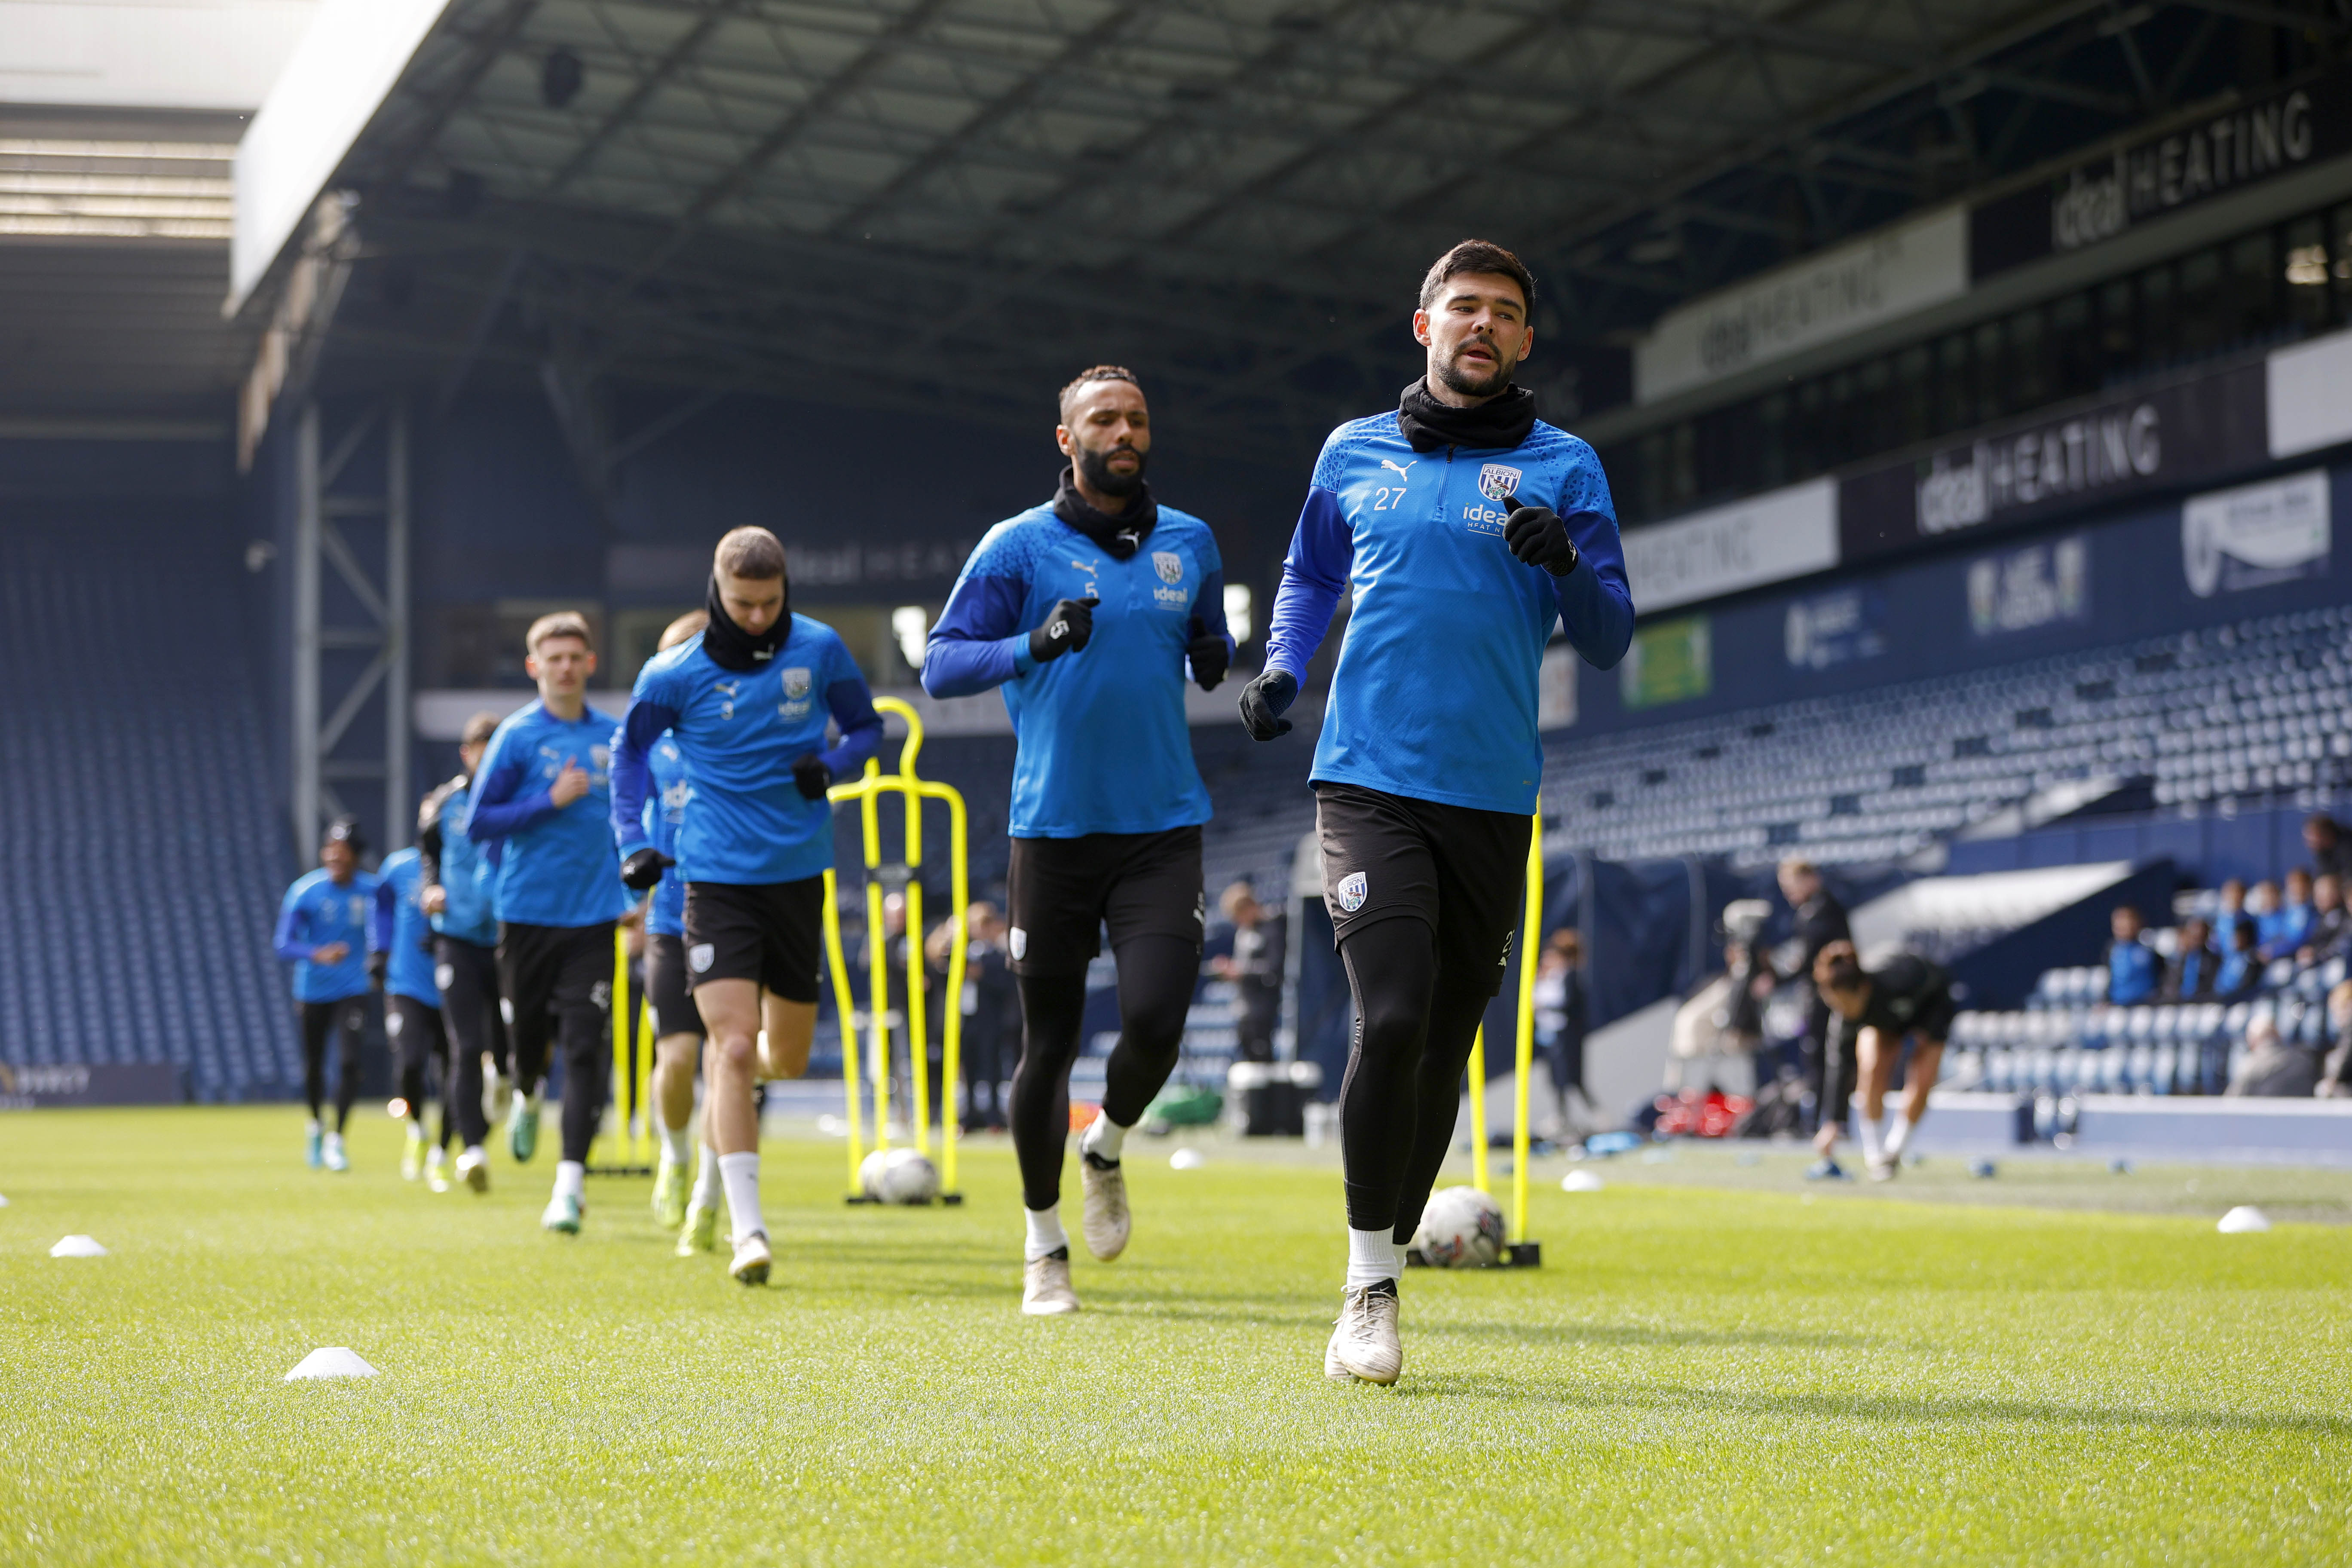 Albion players warming up on the pitch at The Hawthorns during a training session